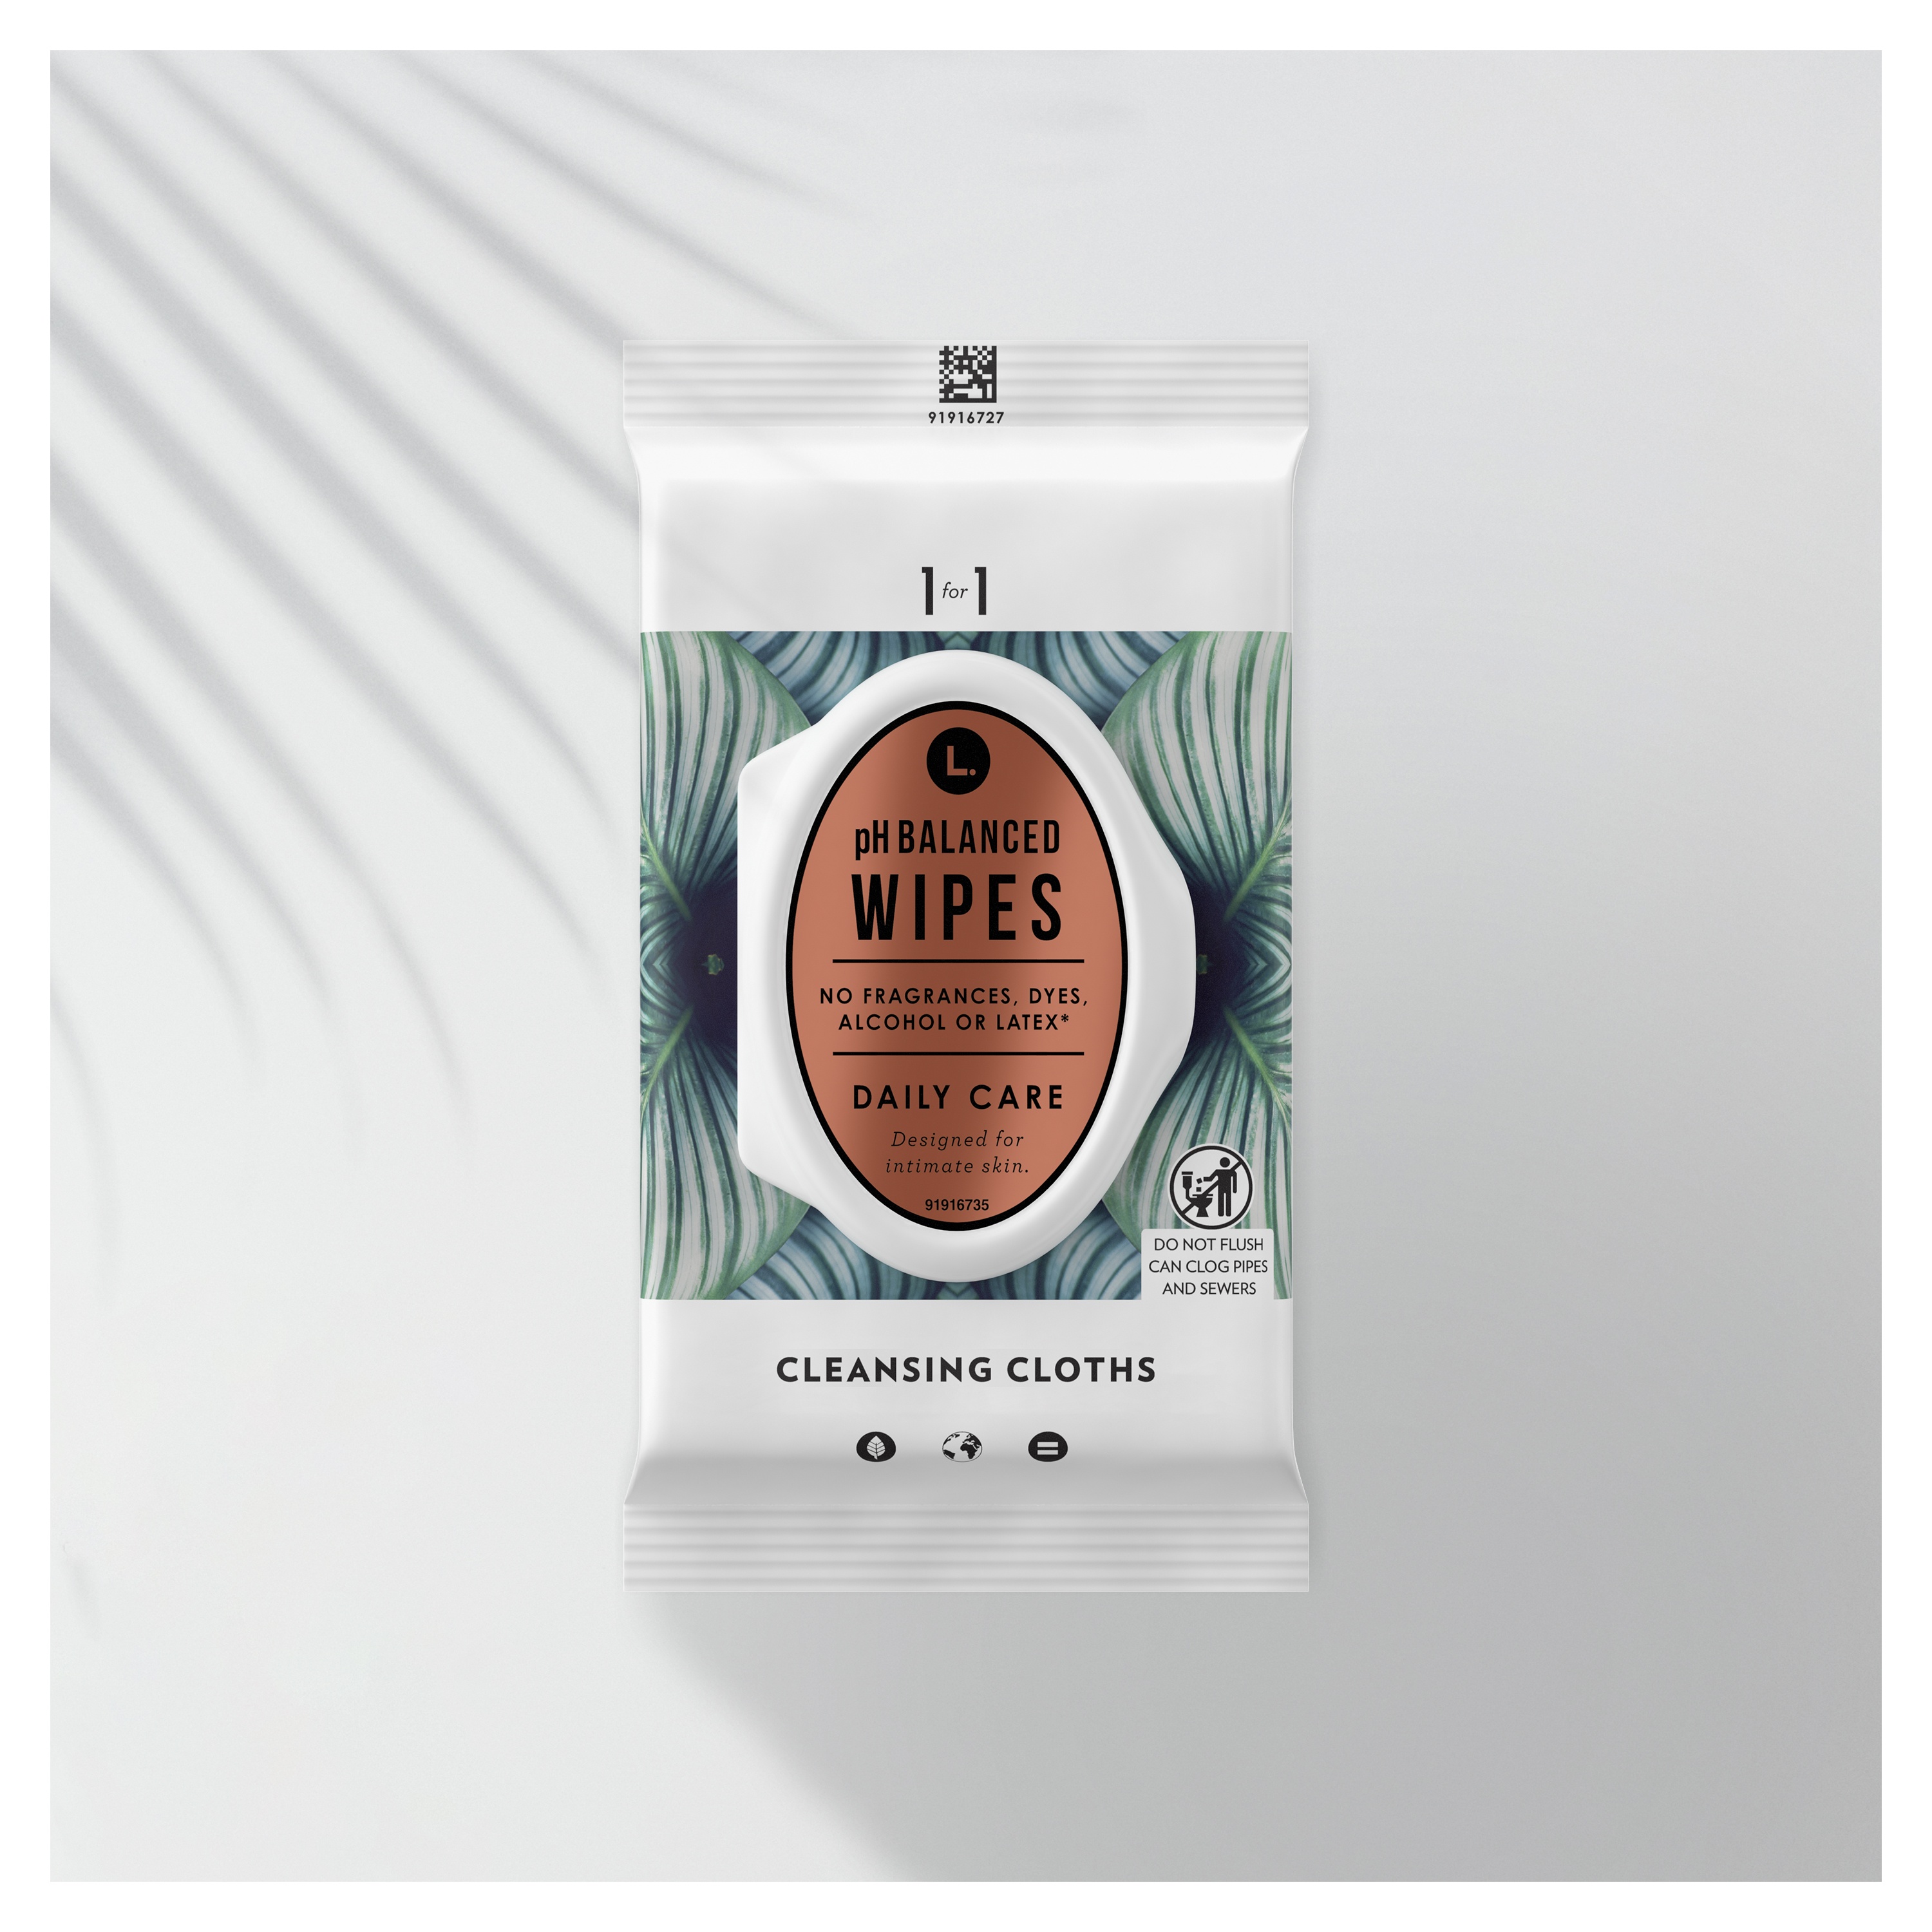 L. Fragrance Free Wipes, pH Balanced, Hypoallergenic, 30 Count - image 5 of 5